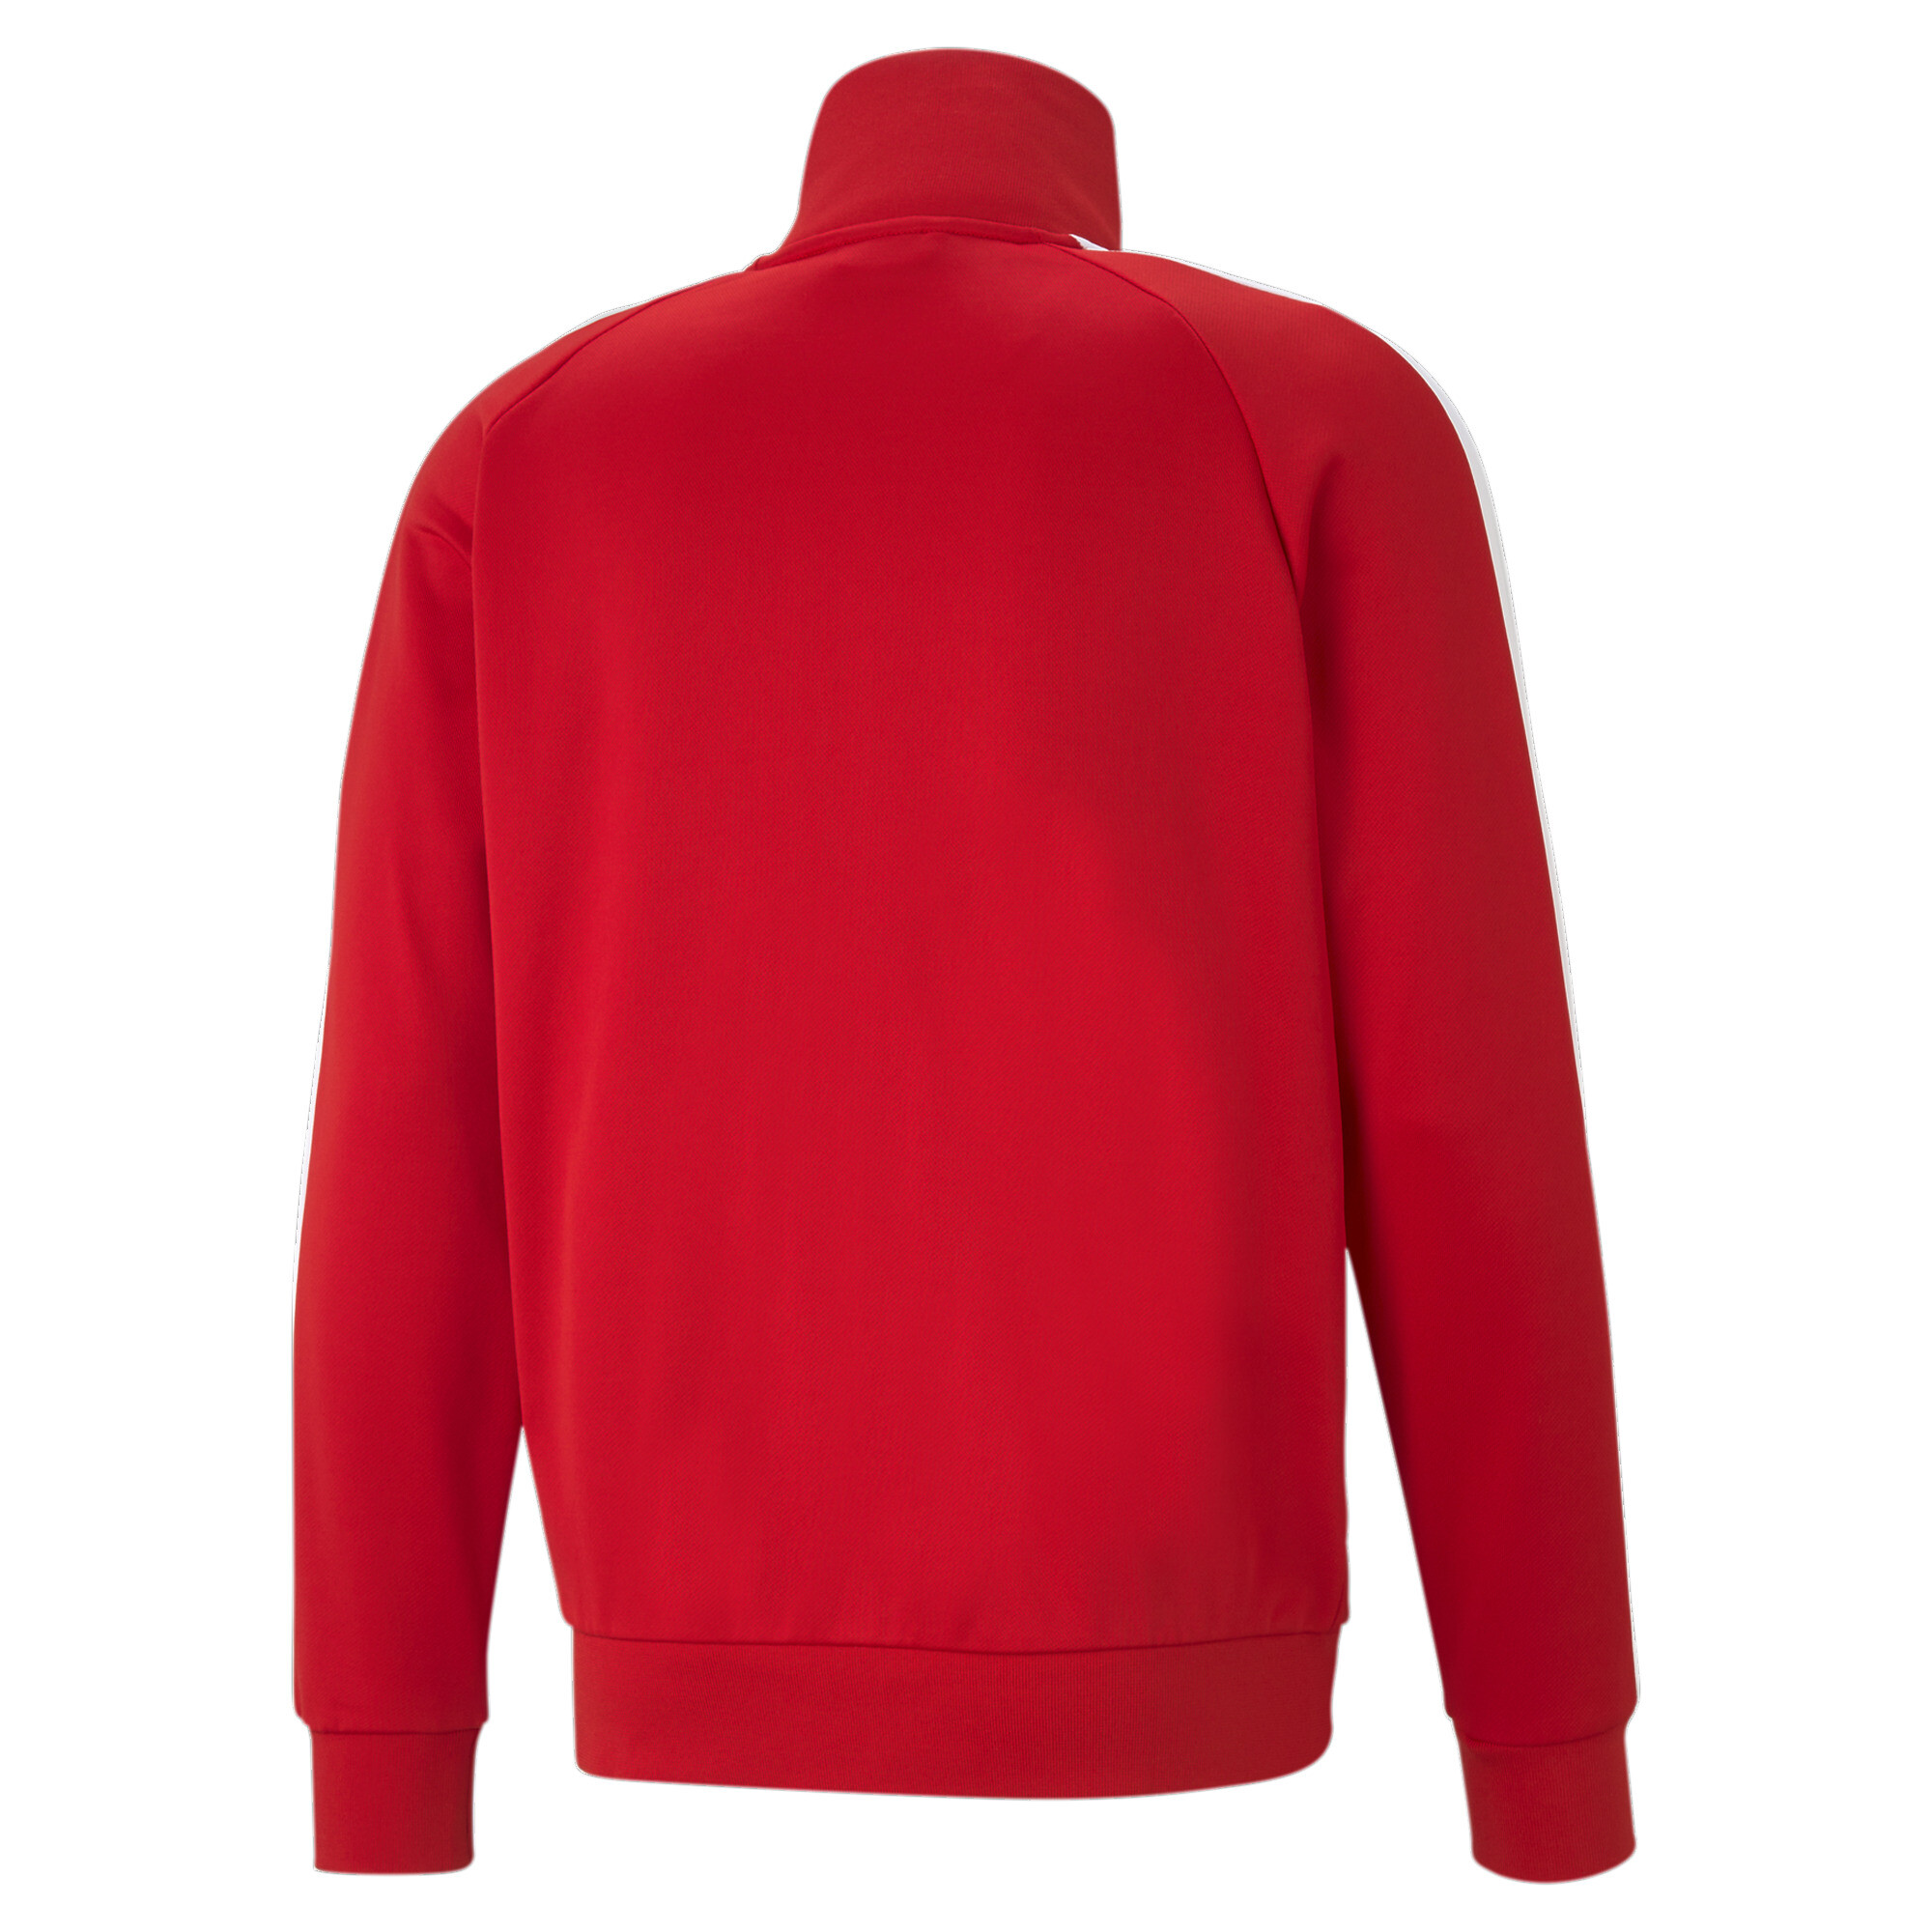 Men's PUMA Iconic T7 Track Jacket In Red, Size 2XL